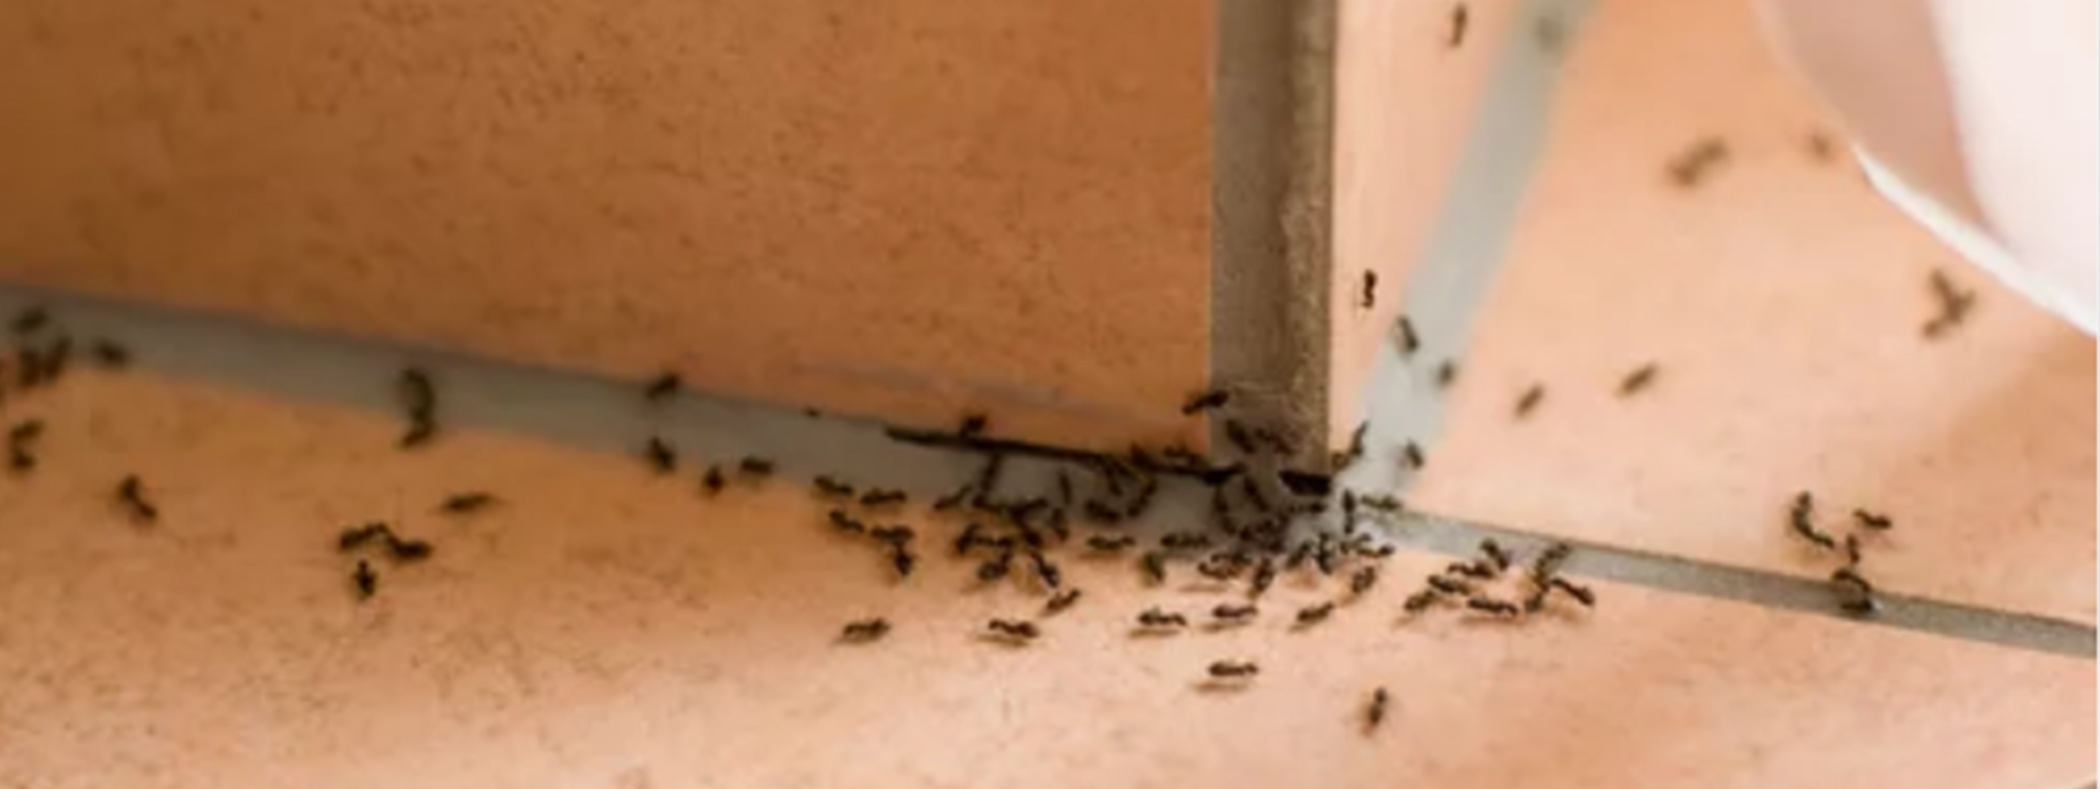 What Happens in an Ant Colony